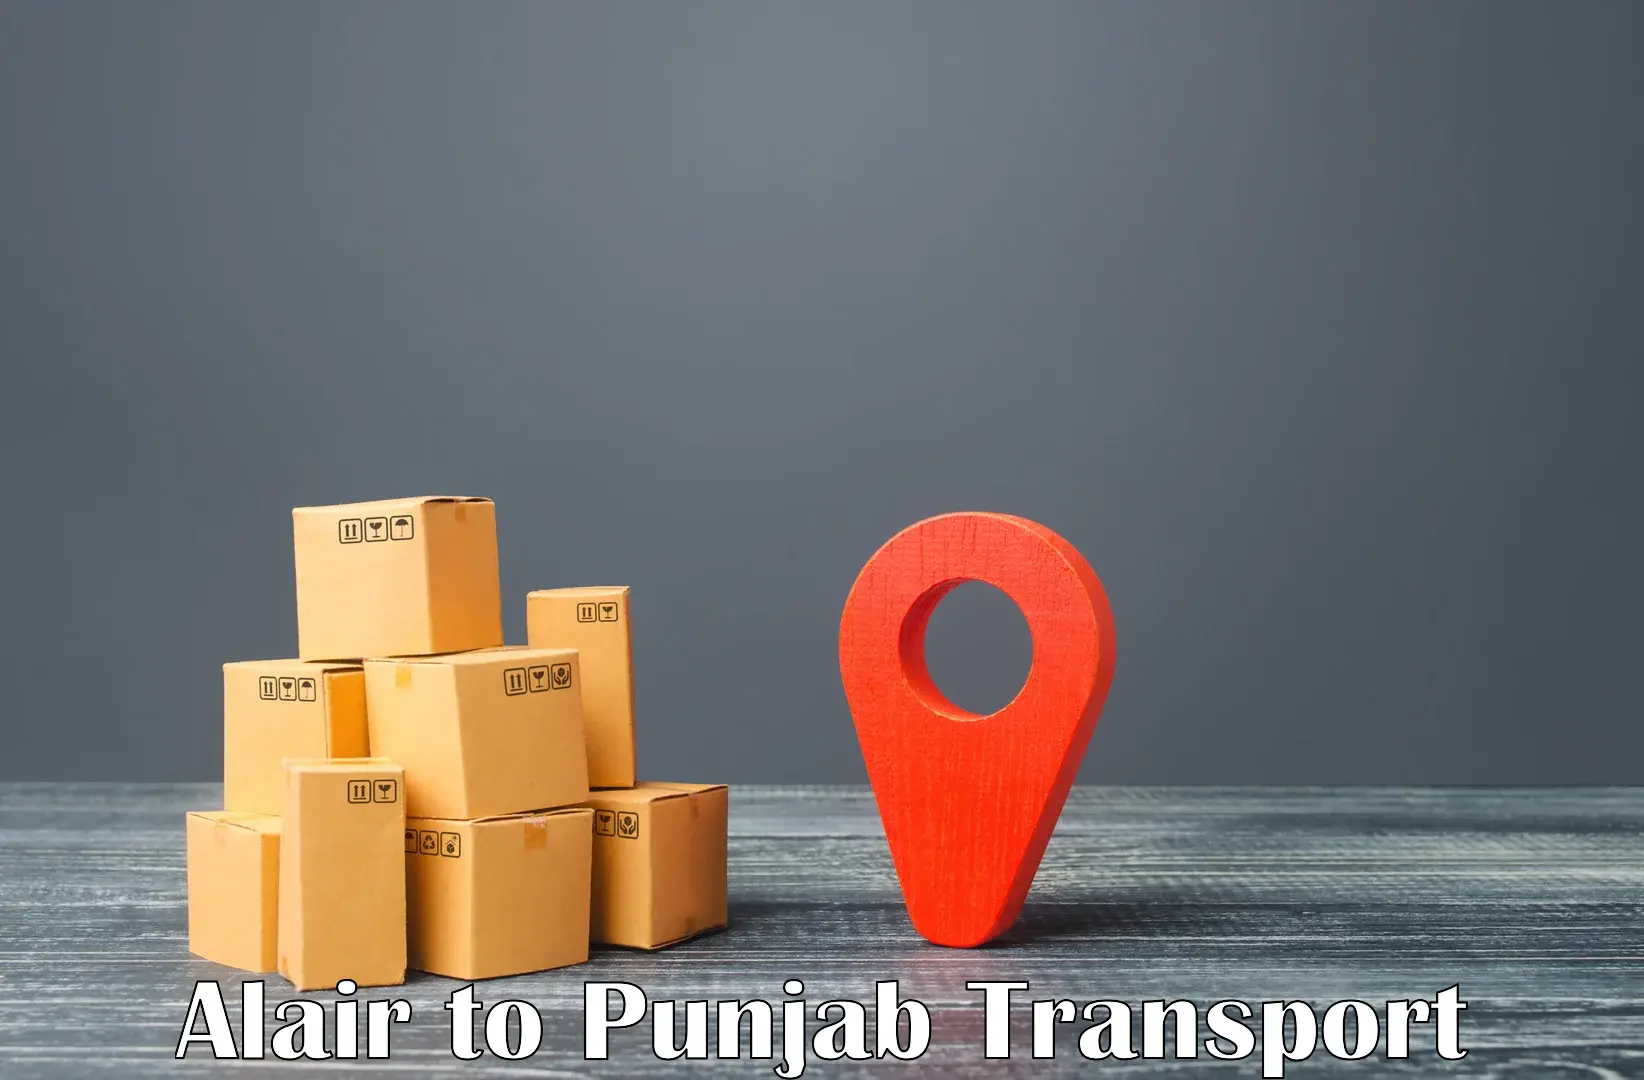 Cycle transportation service Alair to Patiala